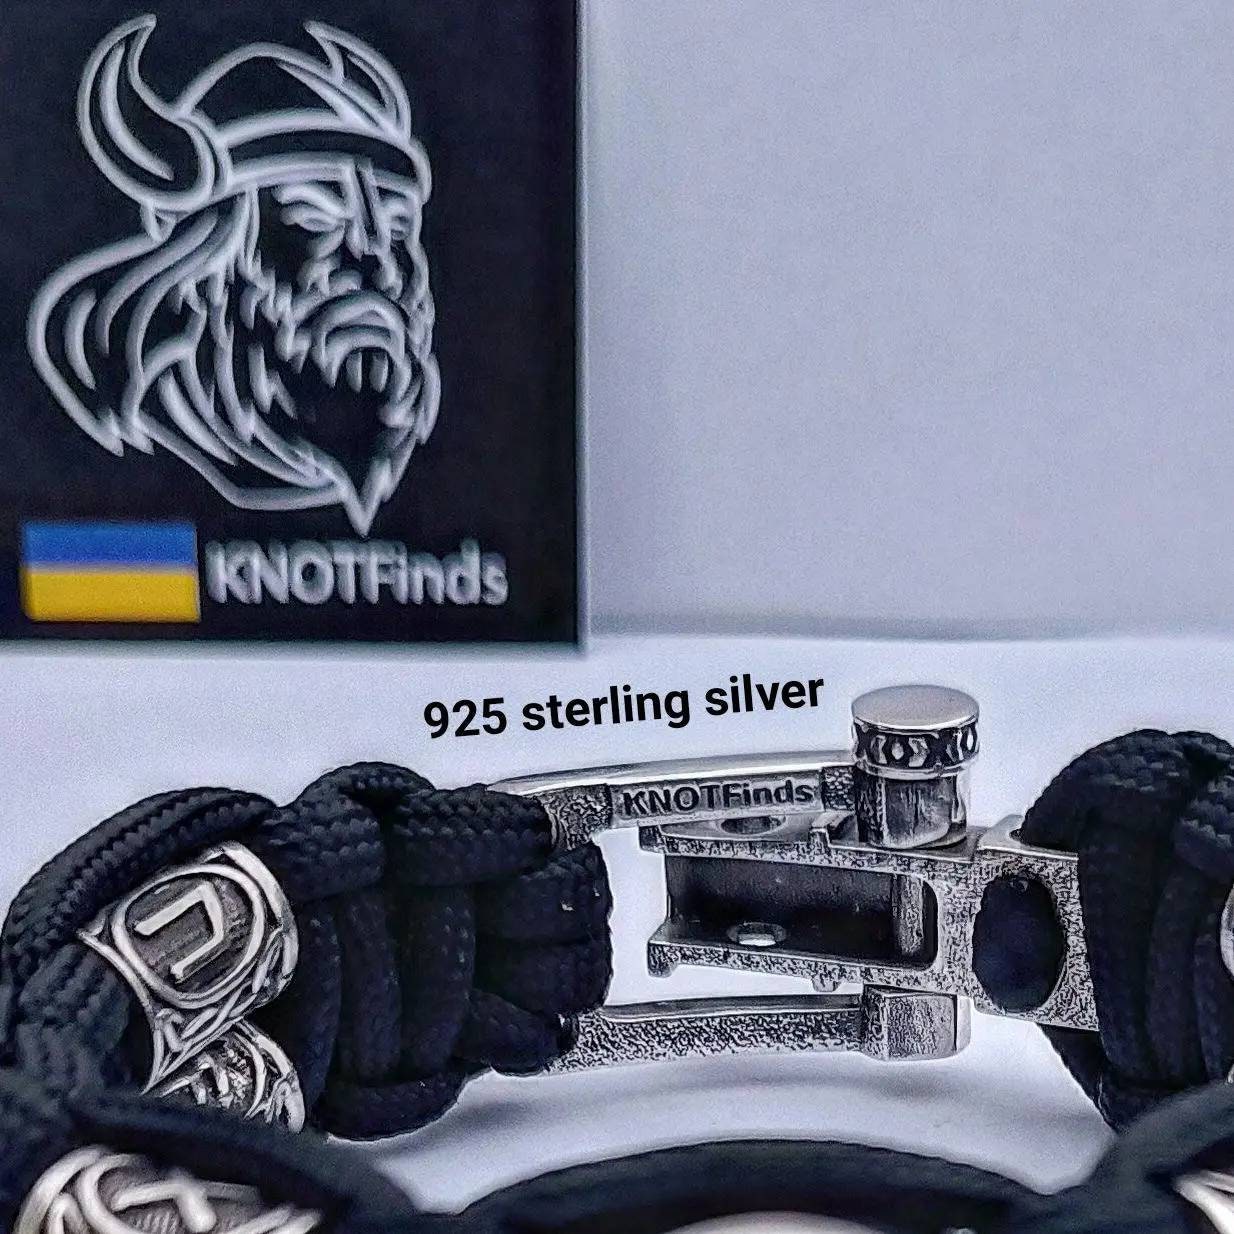 Vegvisir and runes paracord bracelet. 925 Sterling silver runes. Viking jewelry. Protective amulet.